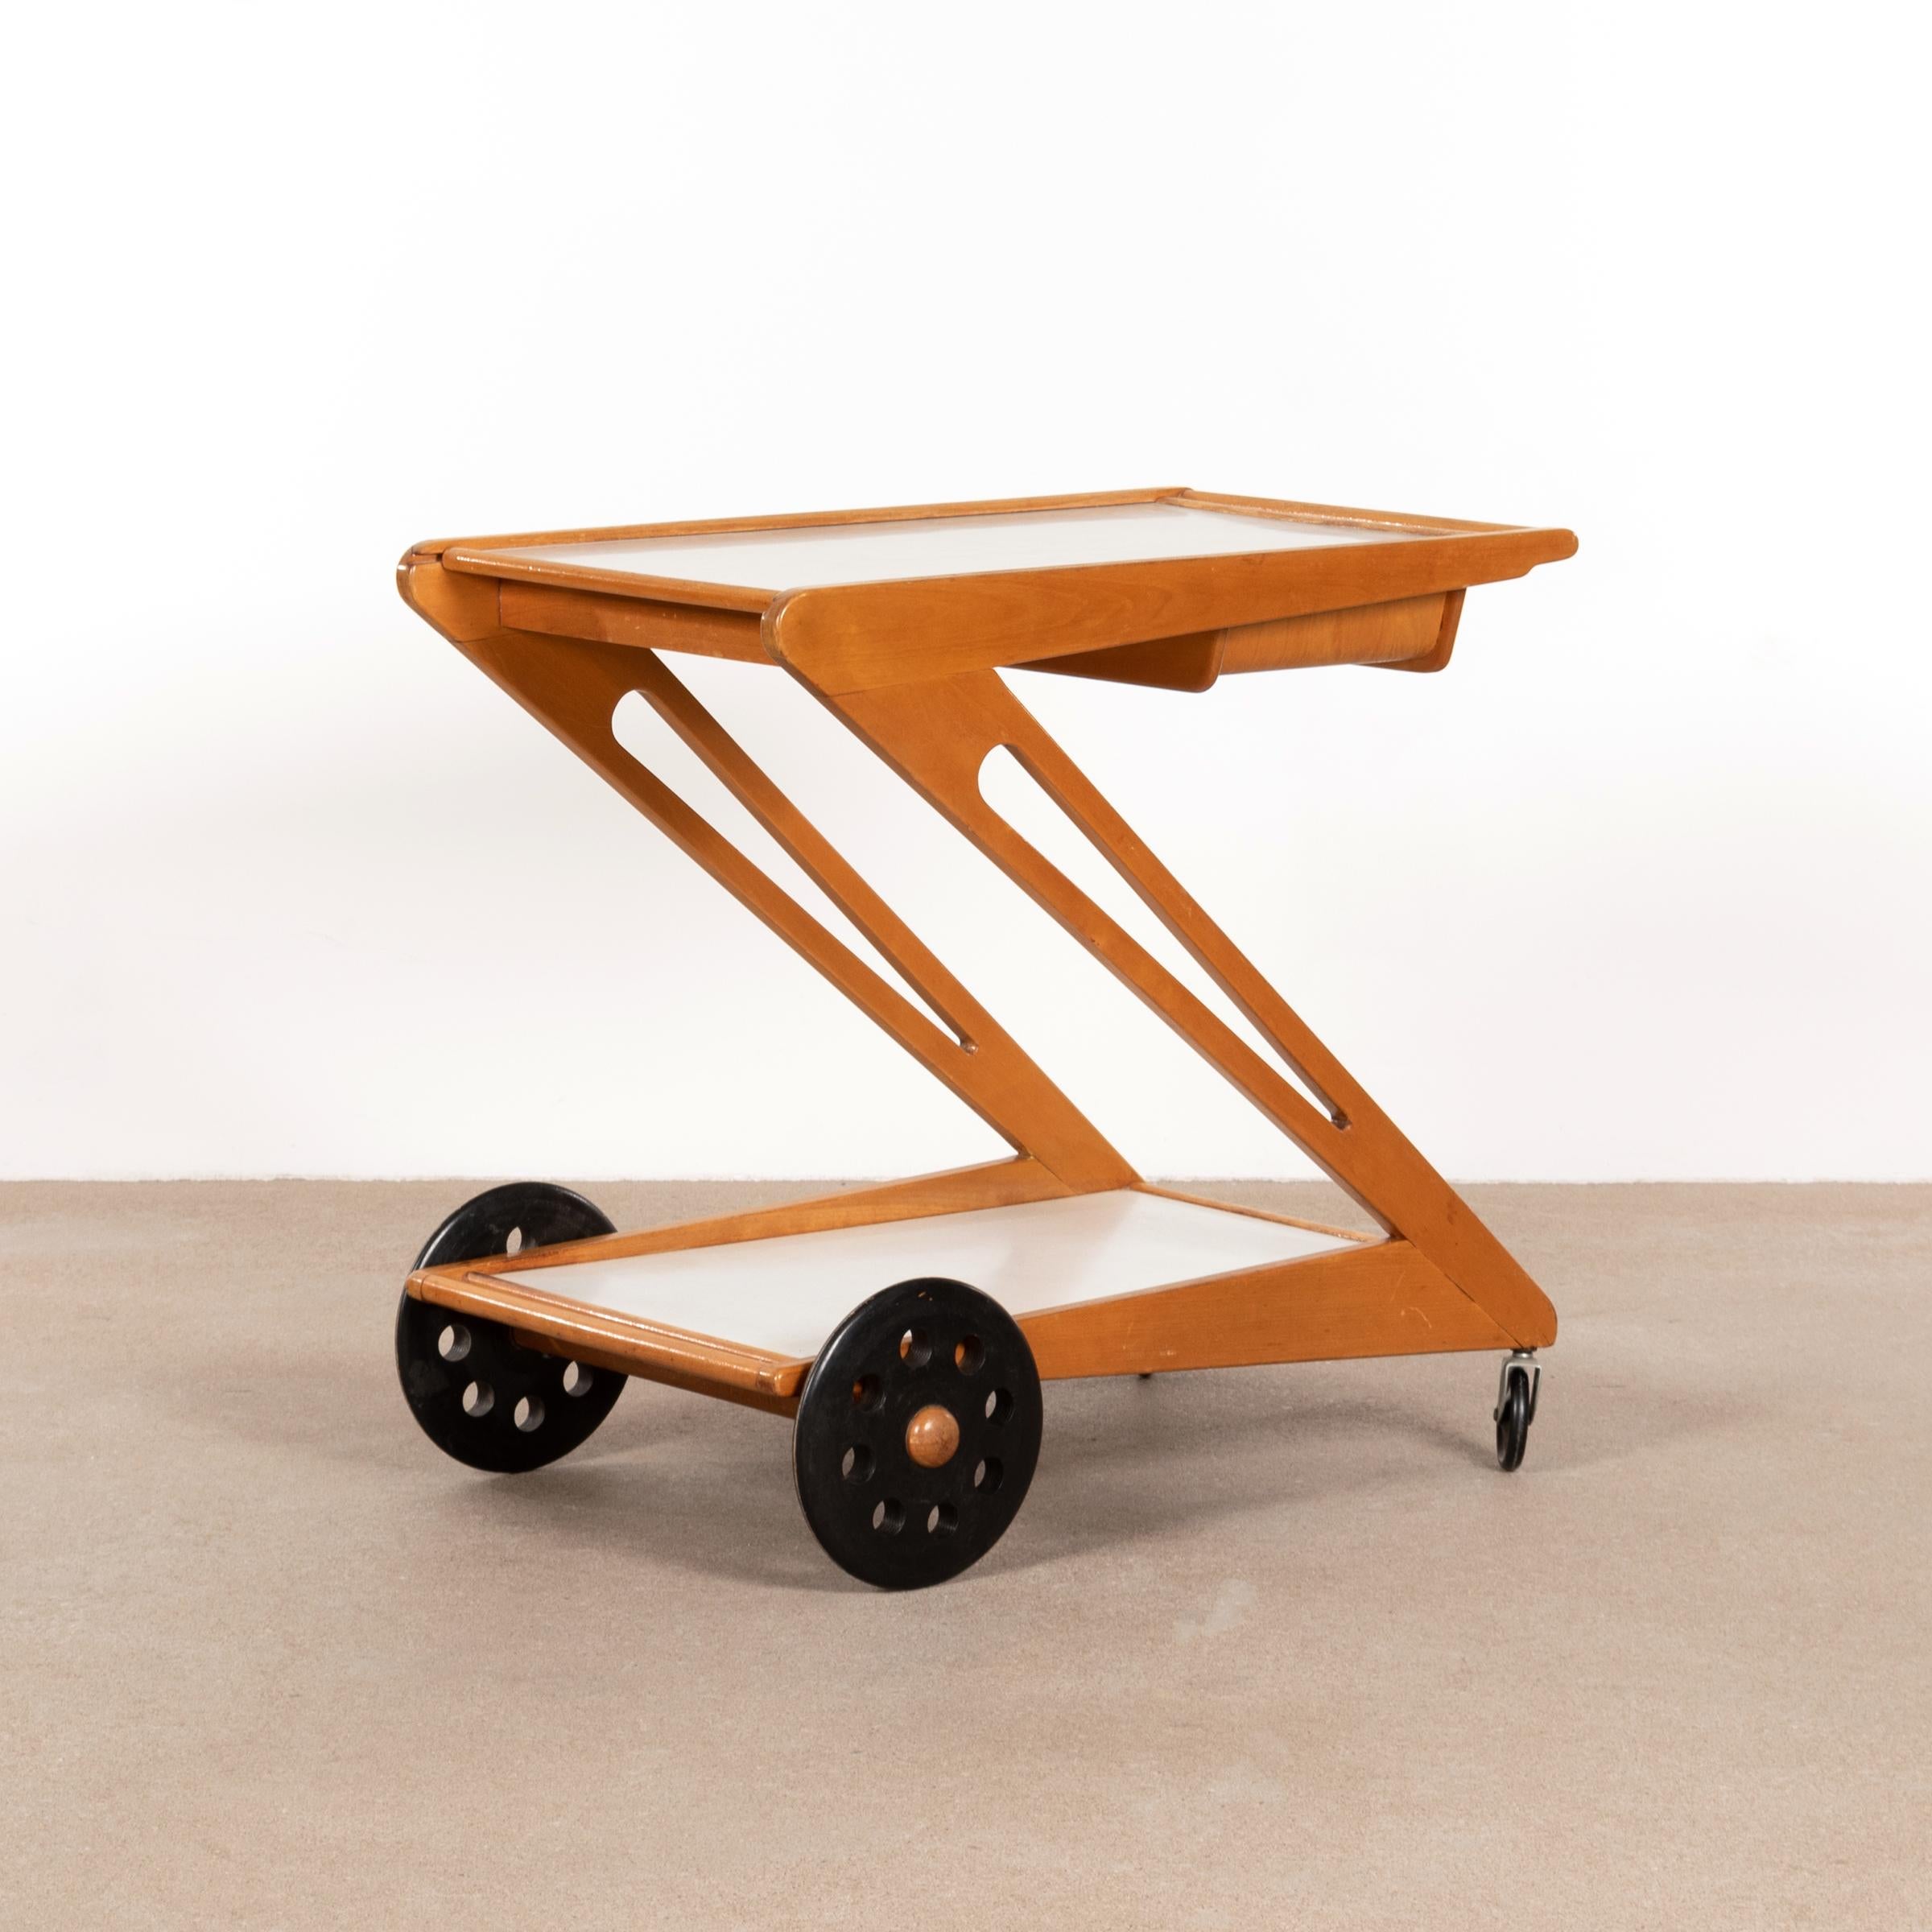 Elegant and hard to find trolley (Mobilo PE03) designed by Cees Braakman in 1953 for UMS Pastoe. Maple/oak wooden Z-shaped frame with two laminated trays. The top tray can slide open and/or removed with a small wooden serving basket underneath.